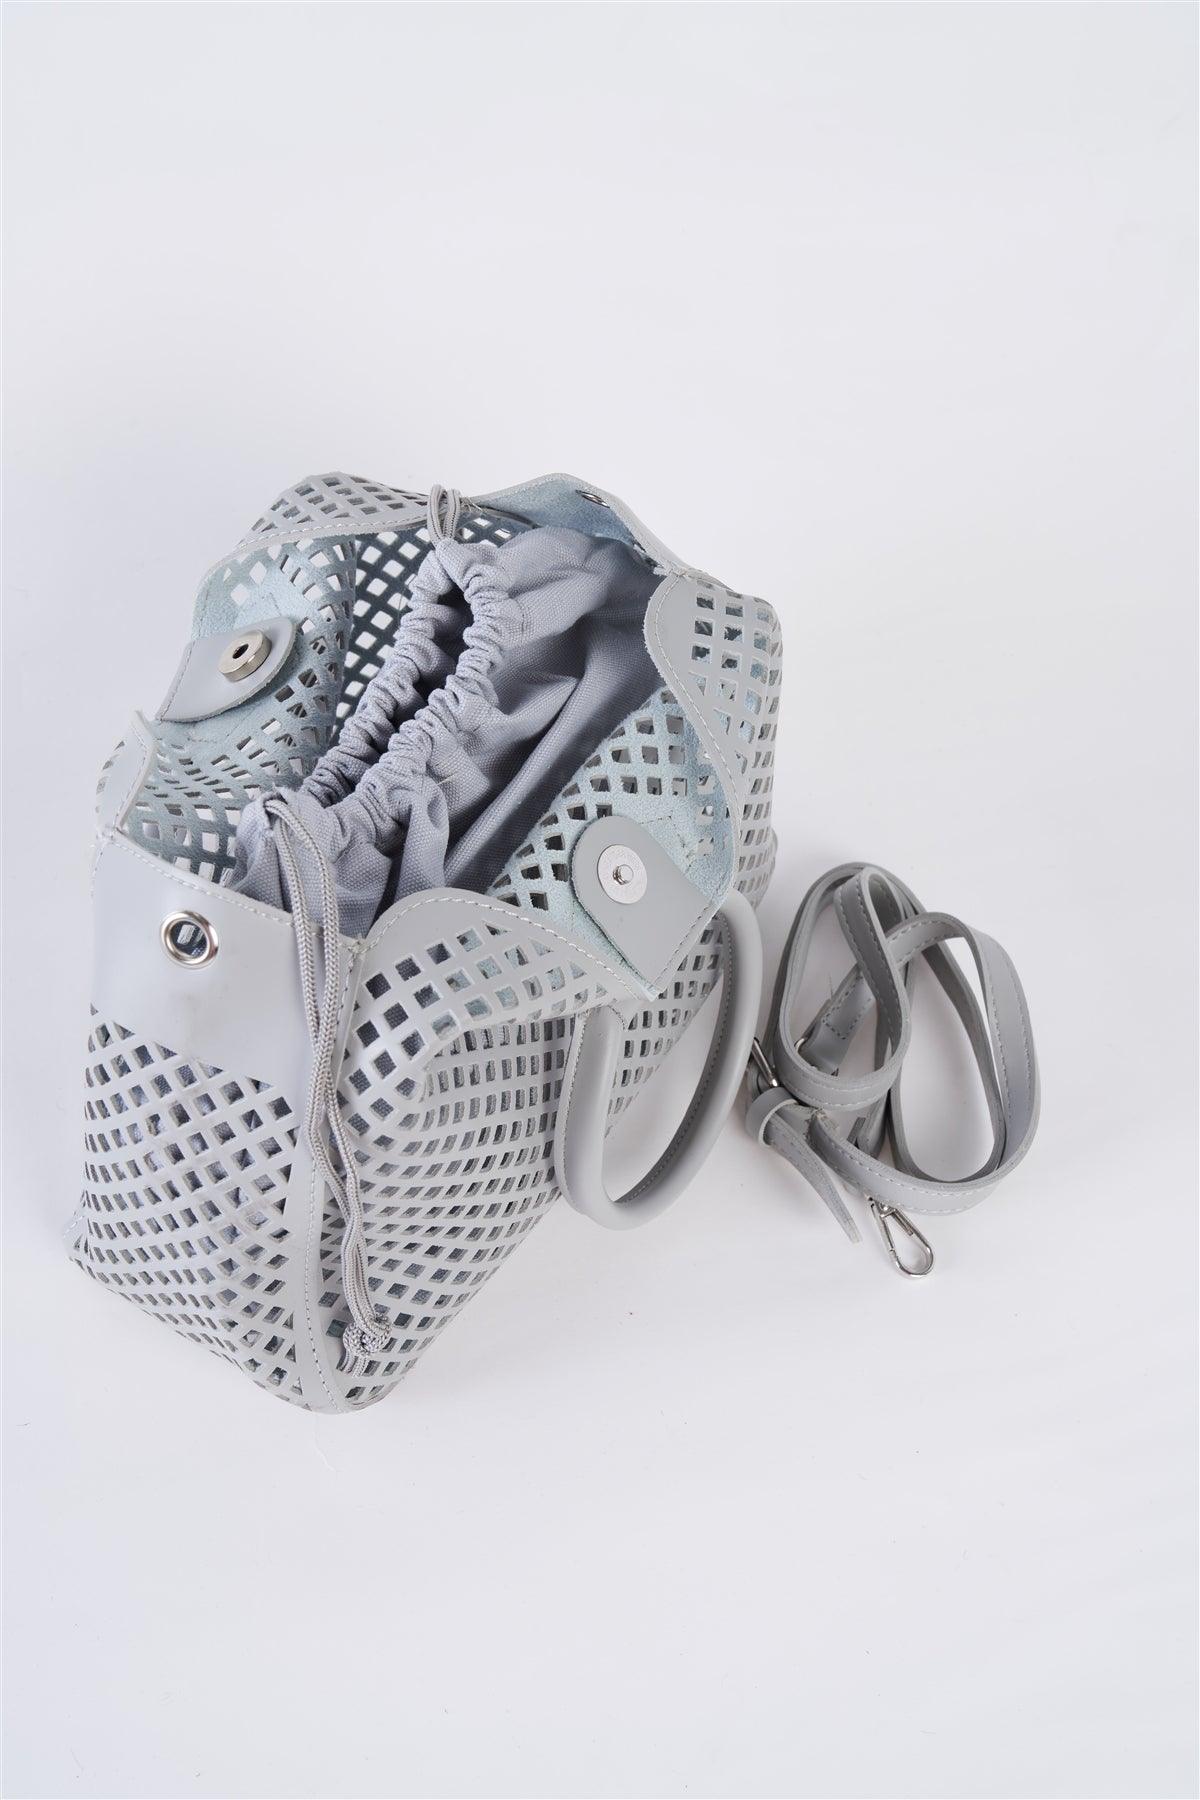 Grey Cloth Double Layered Faux Leather Mesh Hidden Magnetic Snap Button Closure Crossbody Handbag / 3 Bags